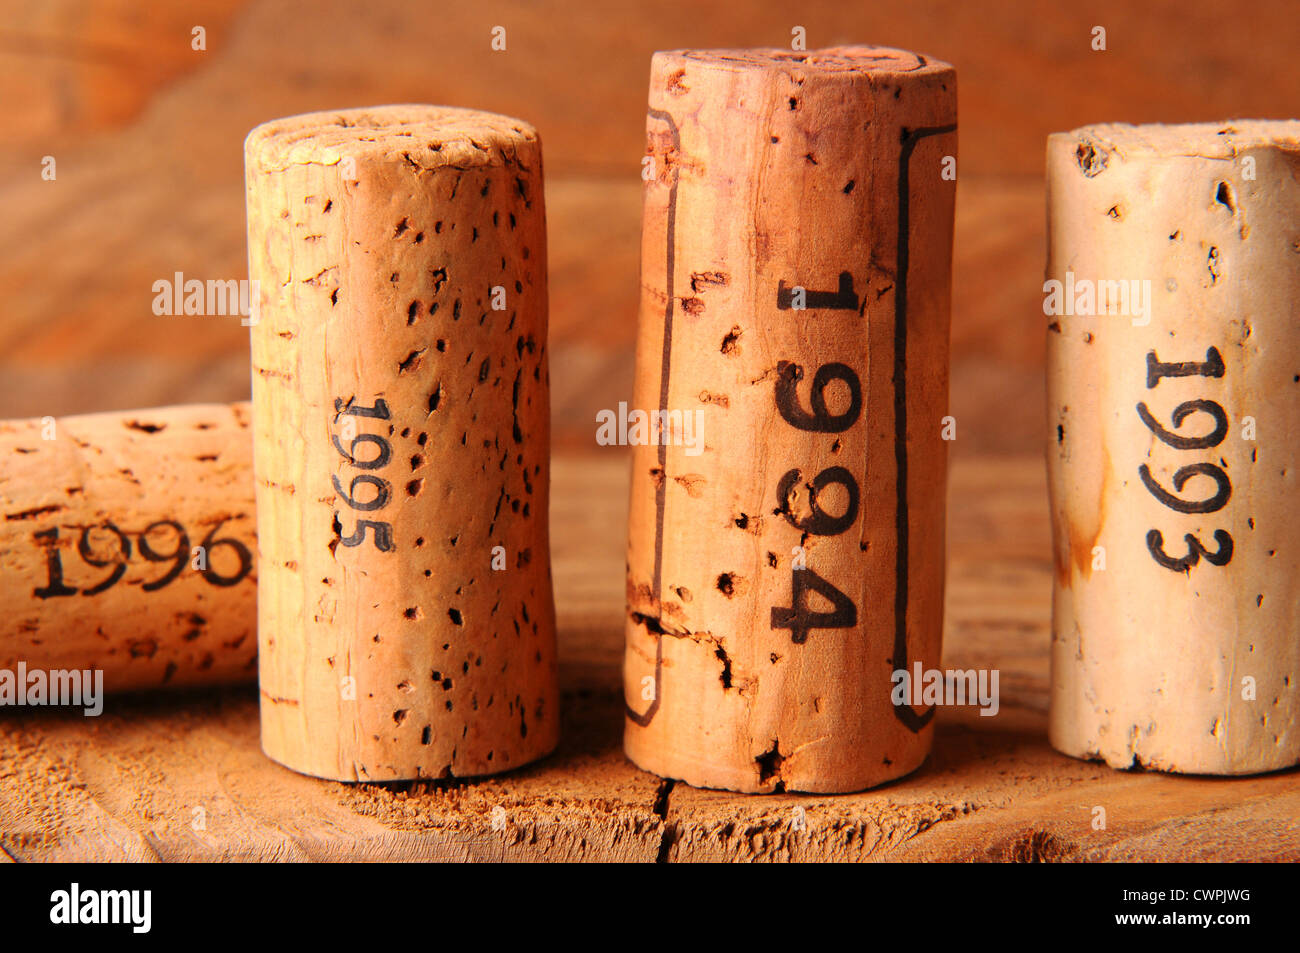 Close up of several wine corks with the vintage year stamped into the side. Stock Photo